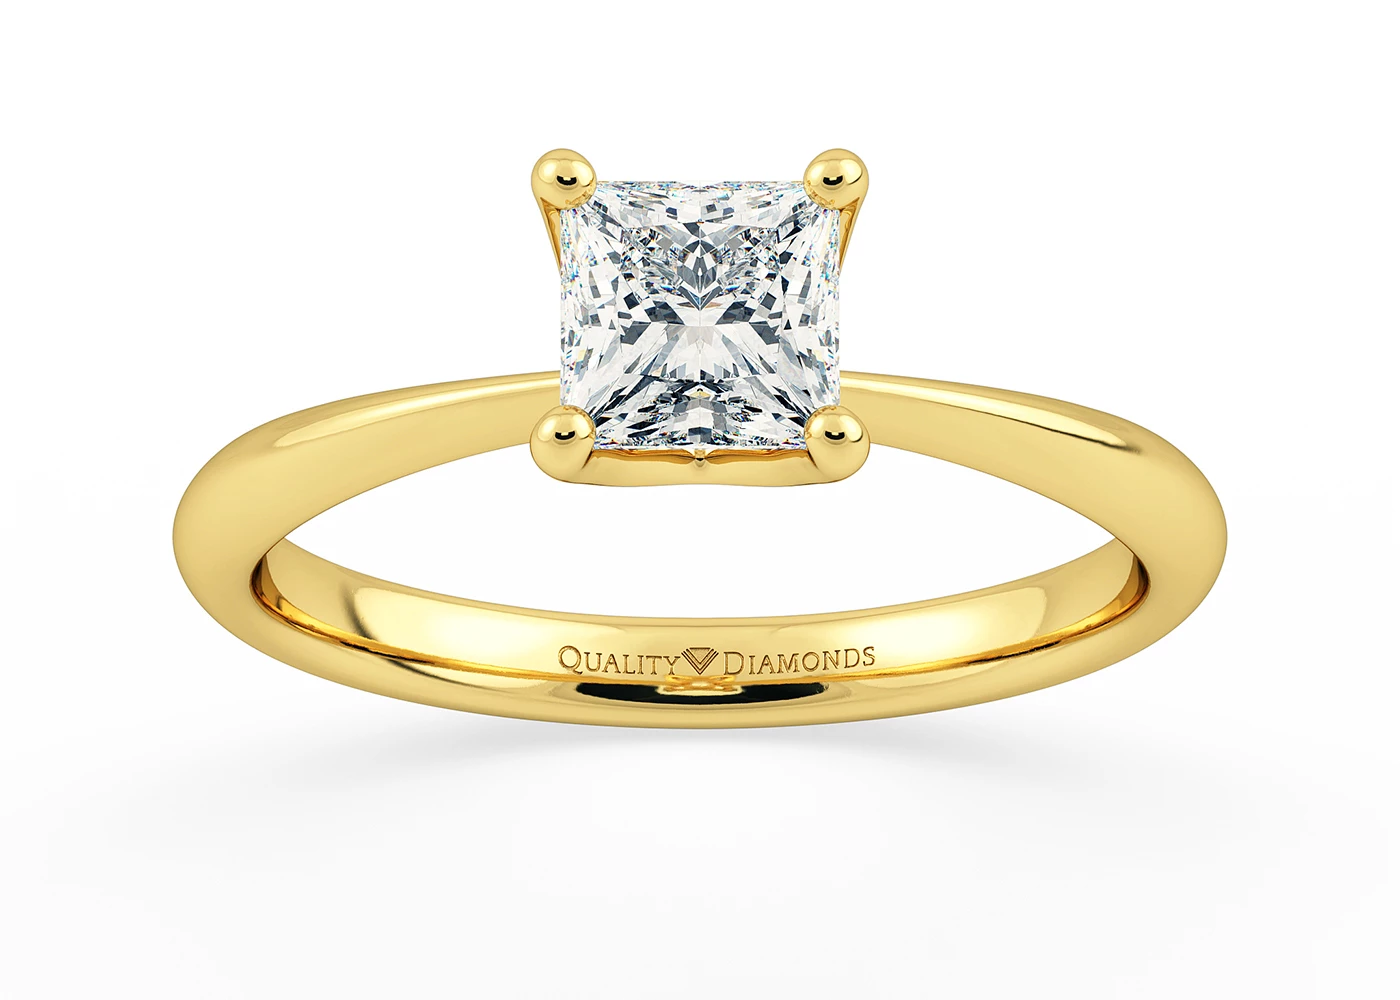 One Carat Princess Solitaire Diamond Engagement Ring in 18K Yellow Gold